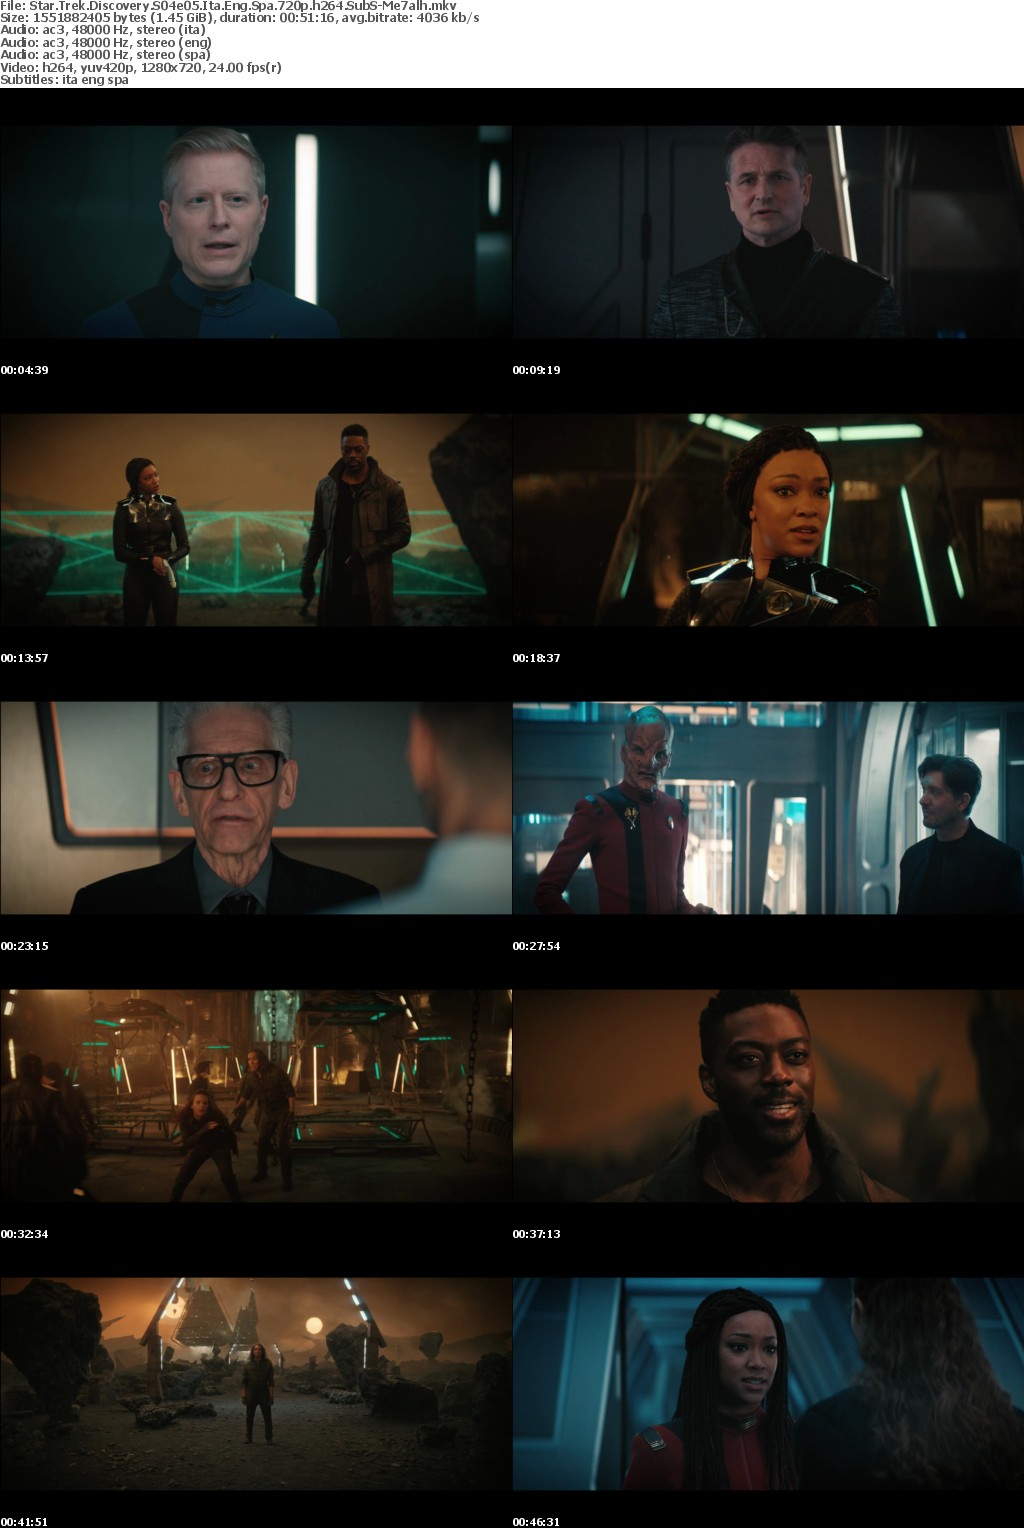 Star Trek Discovery S04e05 720p Ita Eng Spa SubS MirCrewRelease byMe7alh